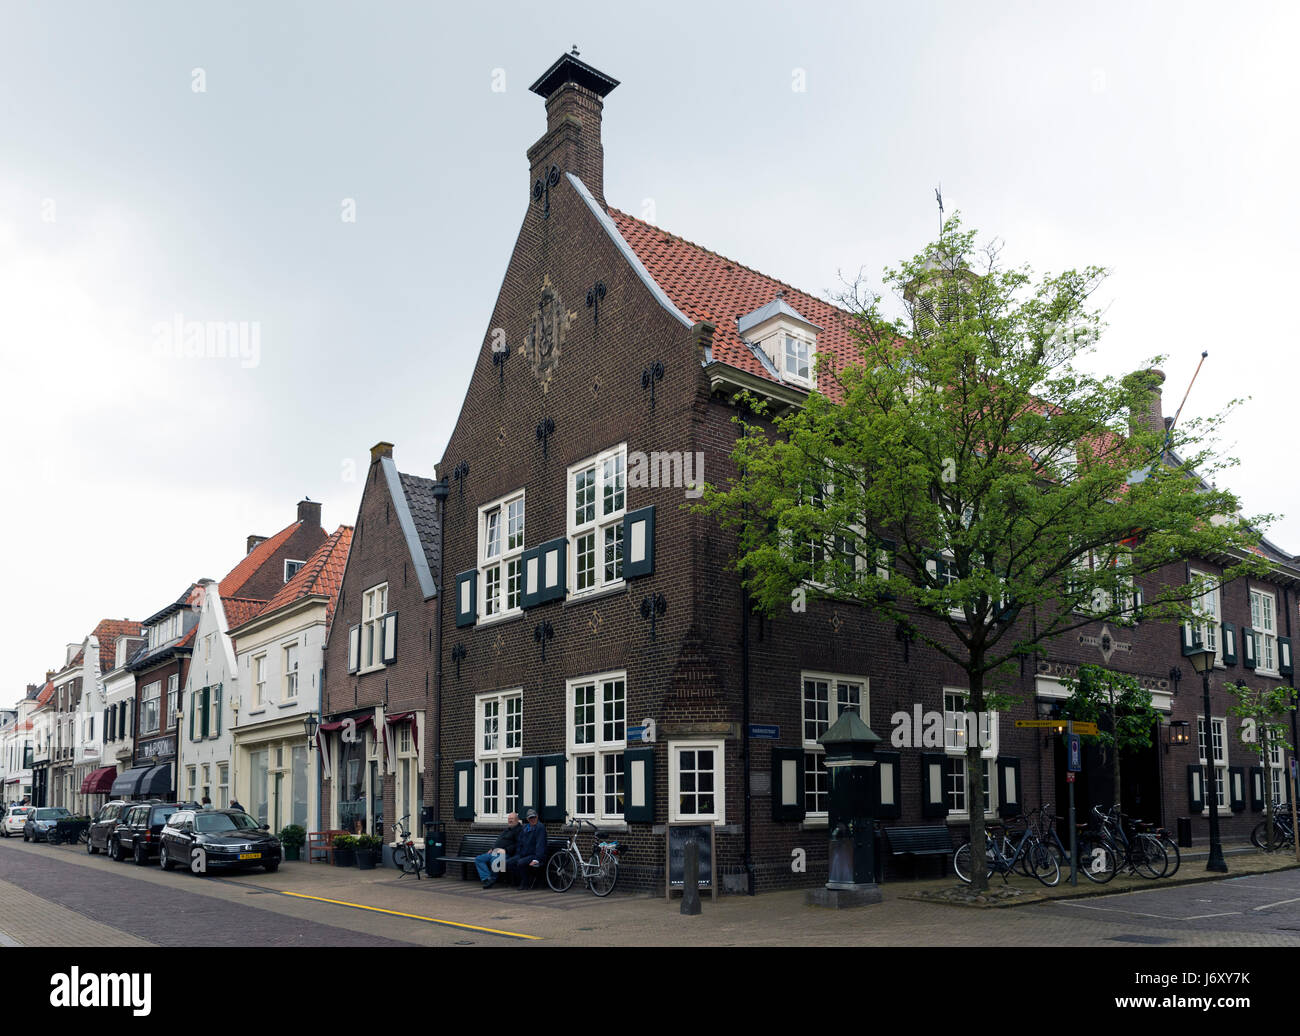 NAARDEN - NETHERLANDS - MAY 13, 2017: Naarden is a city and former municipality in the Gooi region in the province of North Holland in the Netherlands Stock Photo